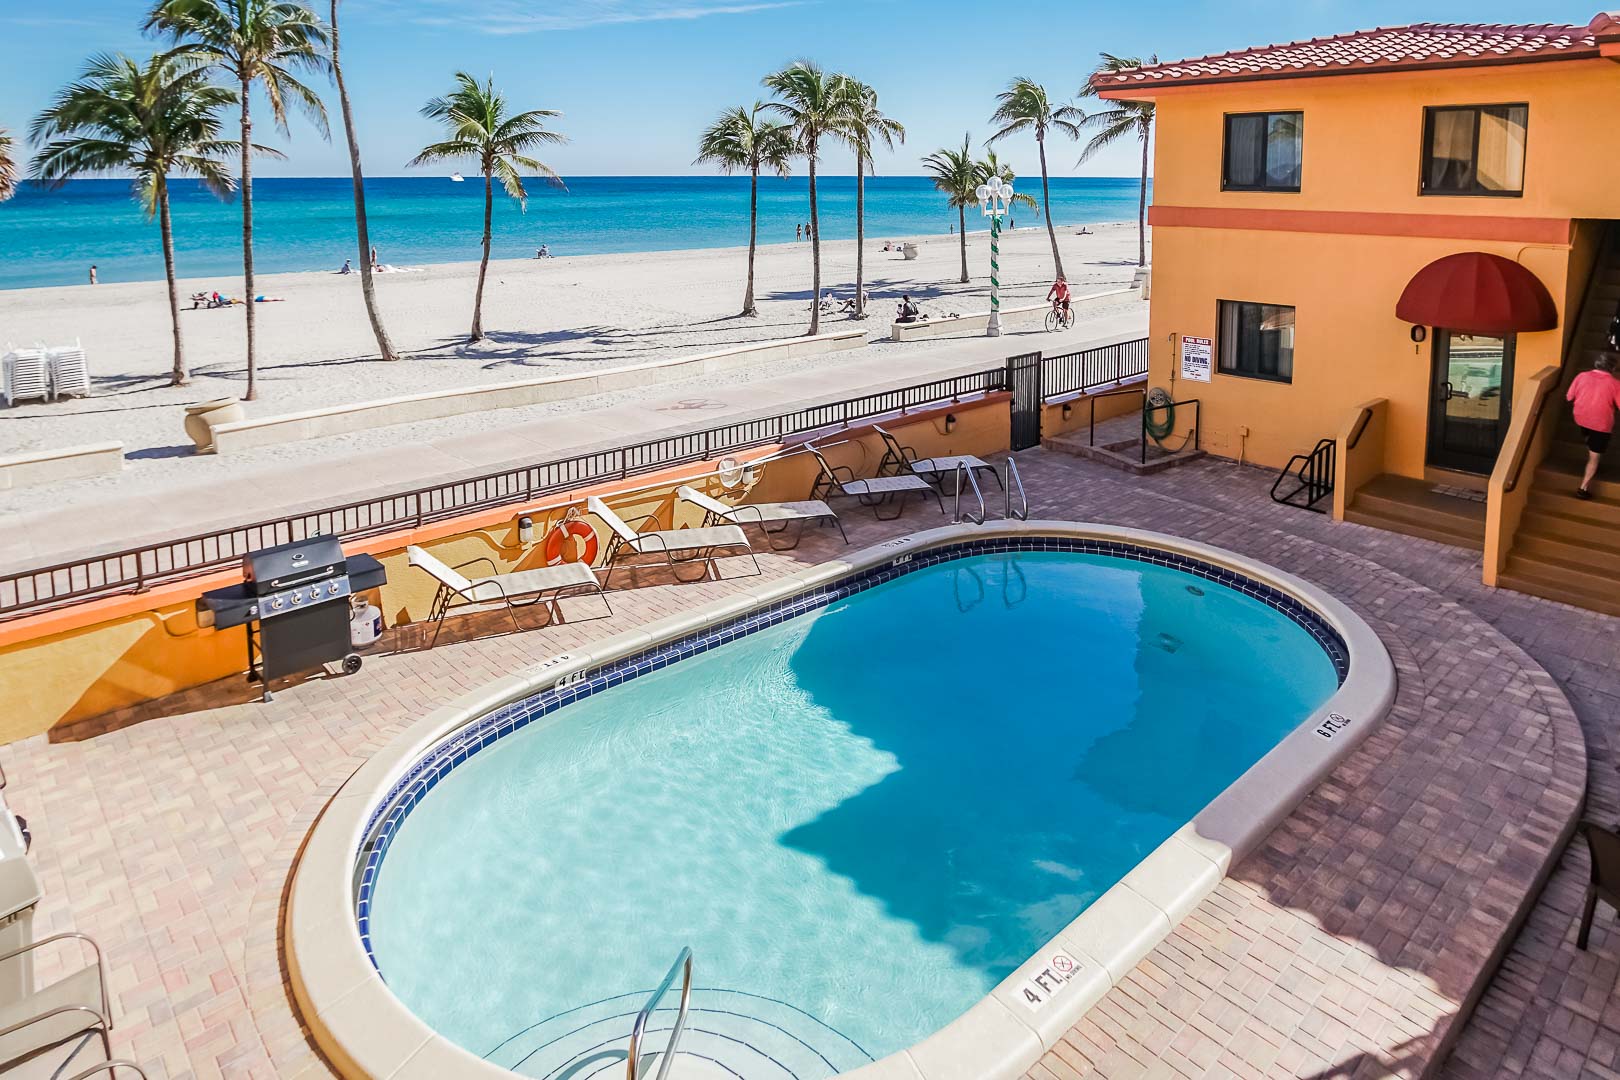 A scenic outdoor swimming pool by the beach at VRI's Hollywood Sands Resort in Hollywood, Florida.